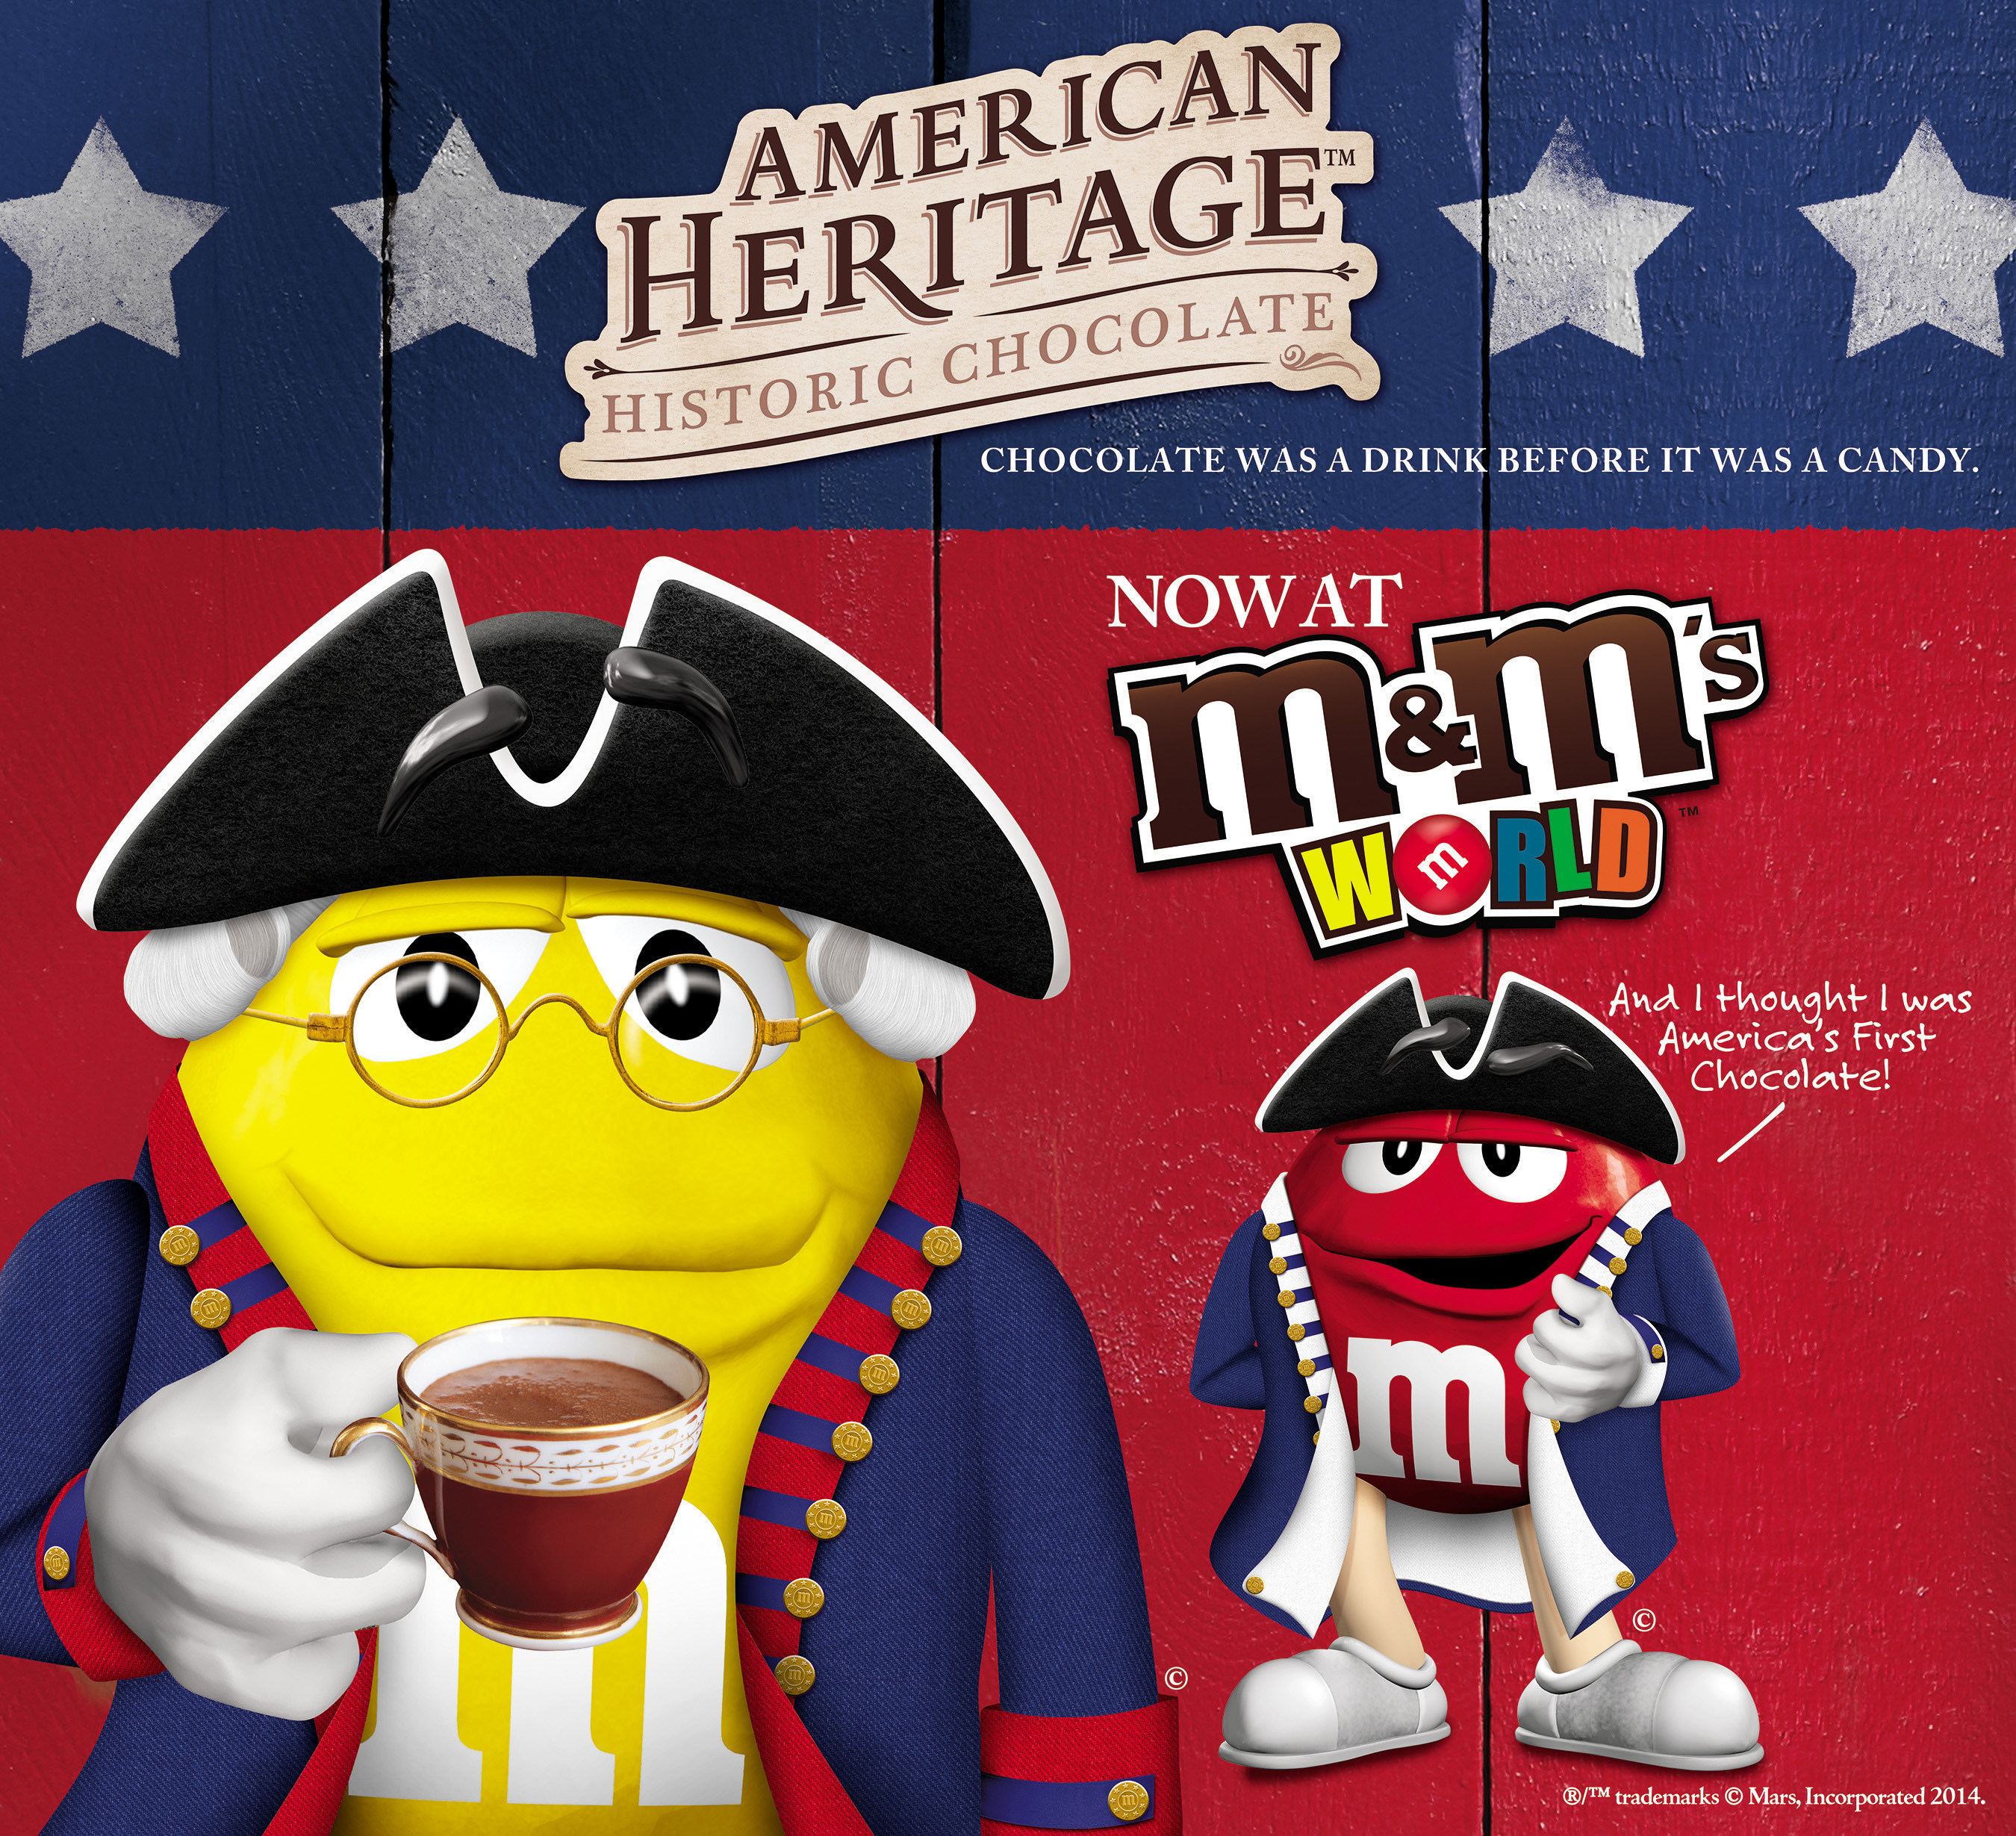 Times Square just got sweeter with the addition of American Heritage(TM) Chocolate at M&M'S World(R)